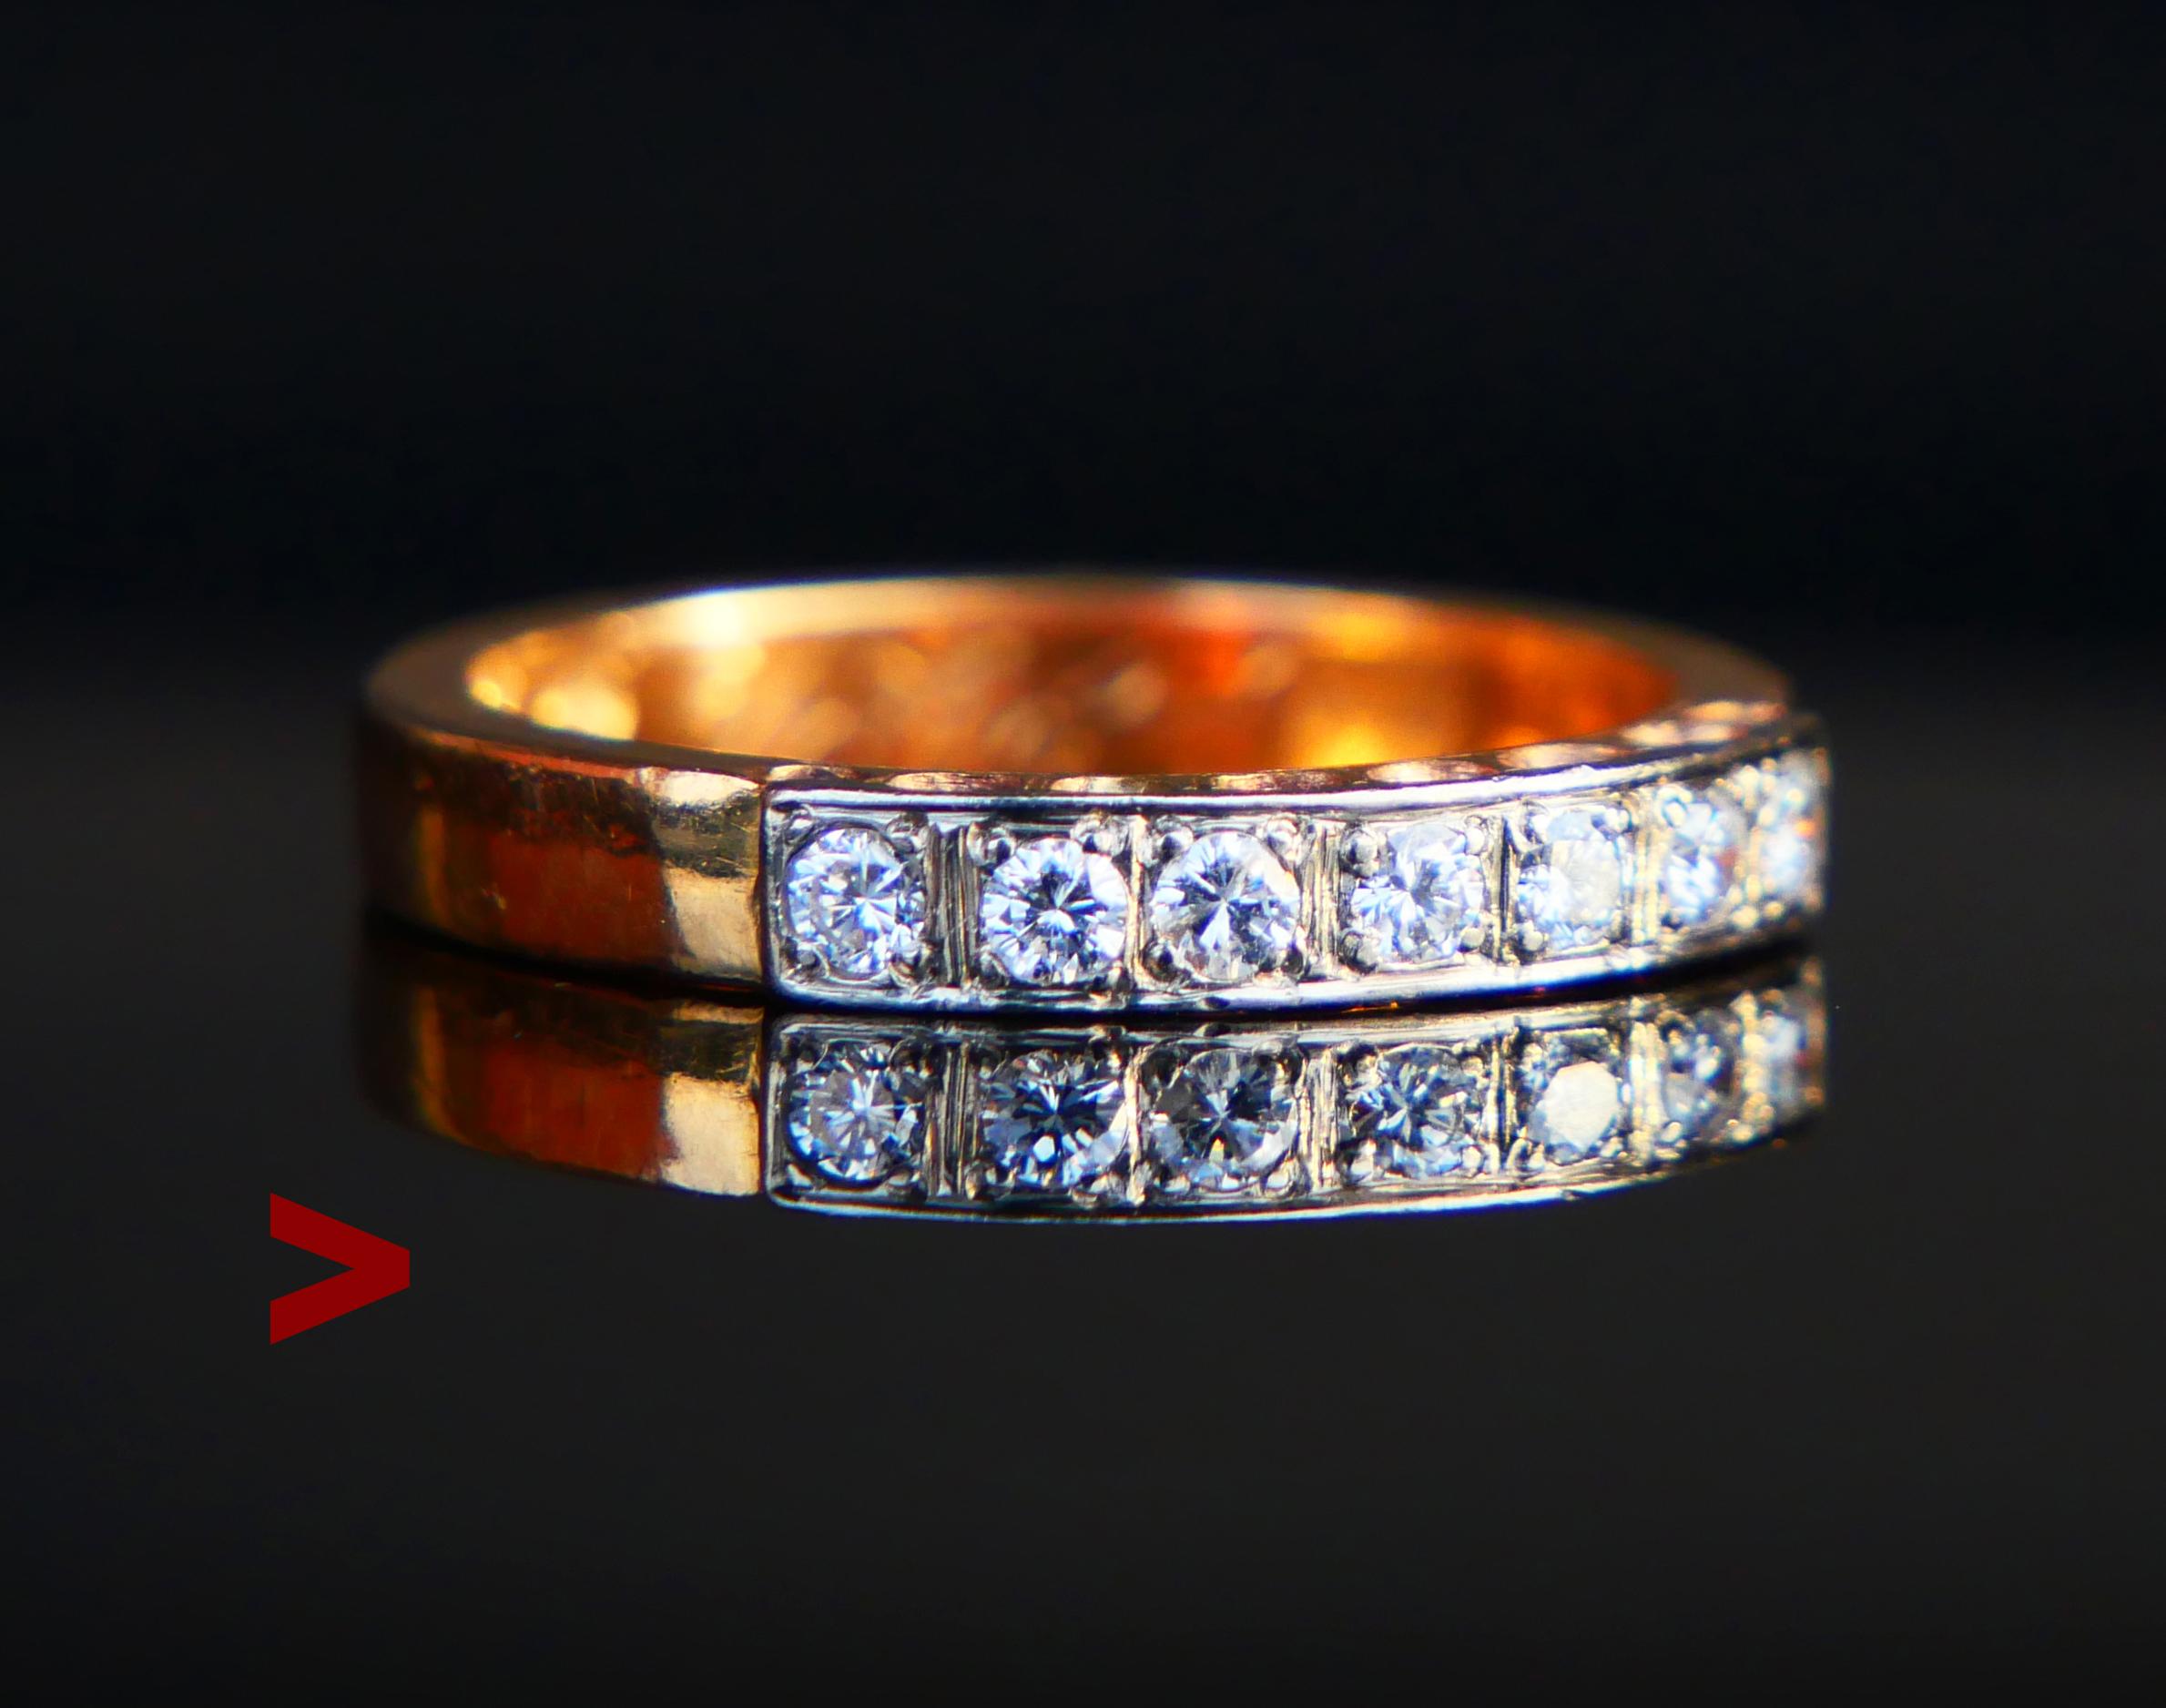 Nordic Alliance Wedding Ring in solid 20K Gold with lane in Platinum for 7 pave set diamond cut Diamonds Ø 2 mm / ca 0.03ct. each. Color ca. F,G / VVS . All stones have backs open and sparkle brightly . Gold has reddish/orange tint.

Swedish